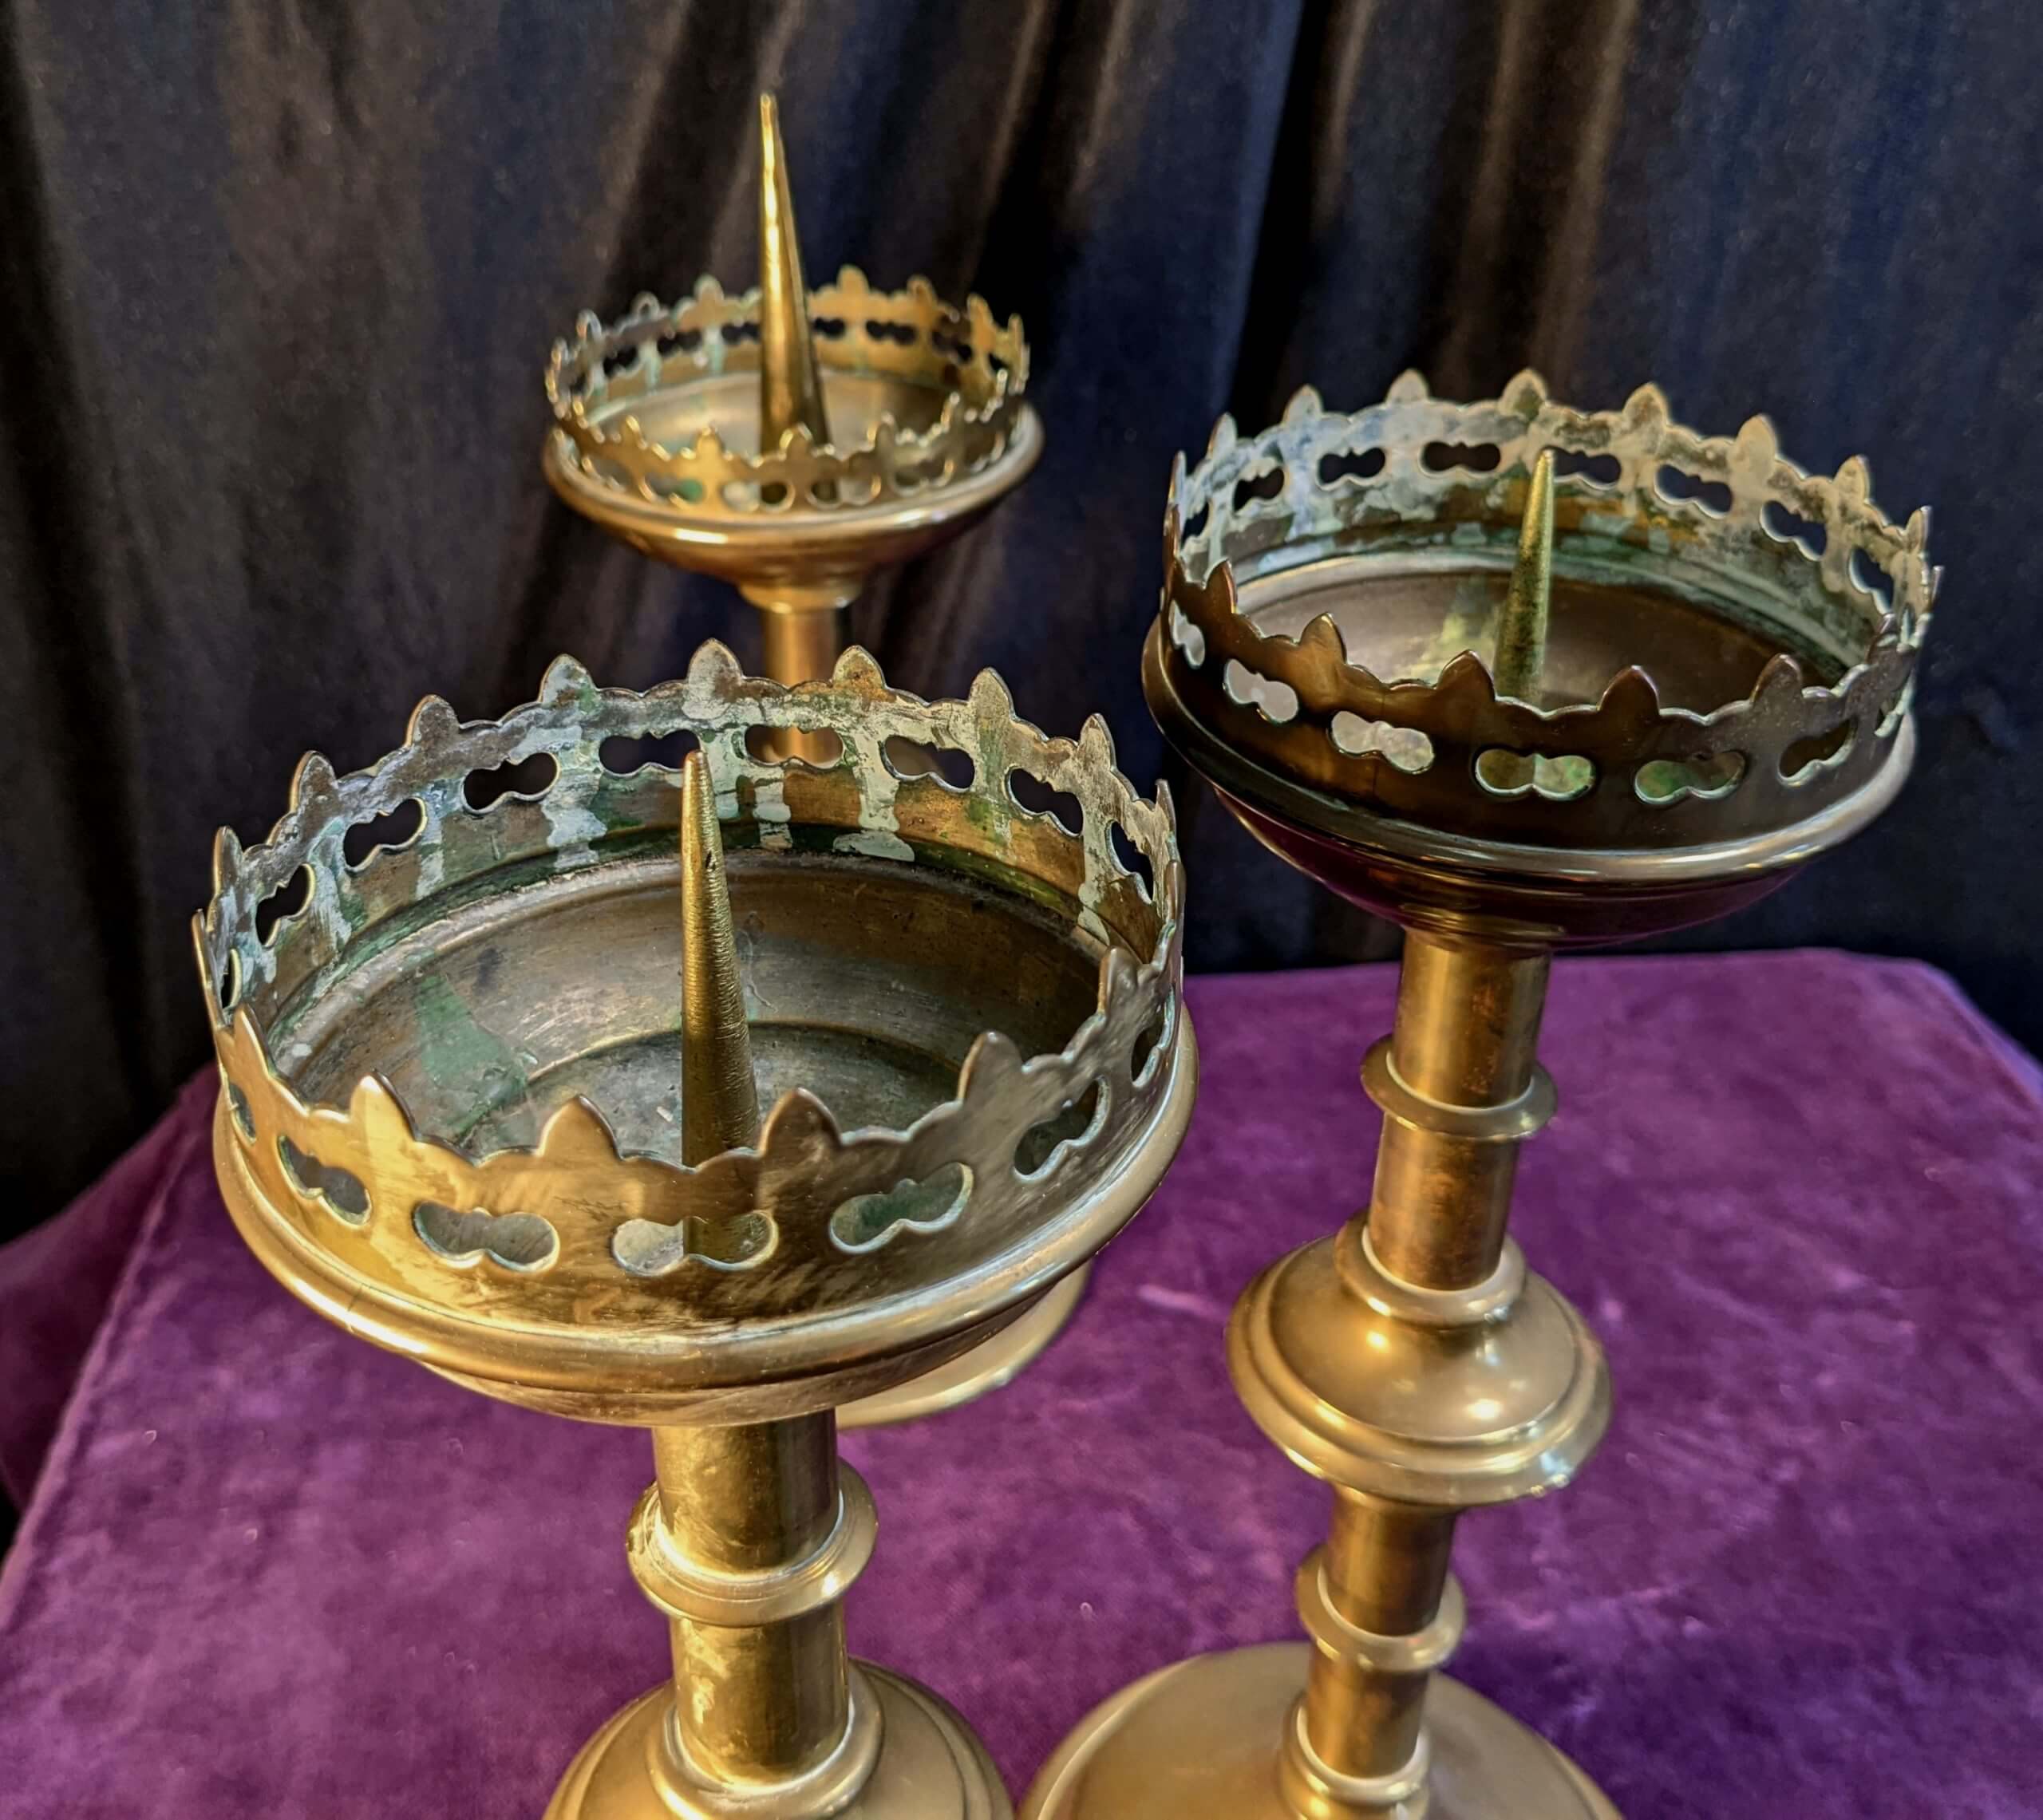 Three Antique Brass Pricket Gothic Church Candle Sticks Holders (SOLD) -  Antique Church Furnishings